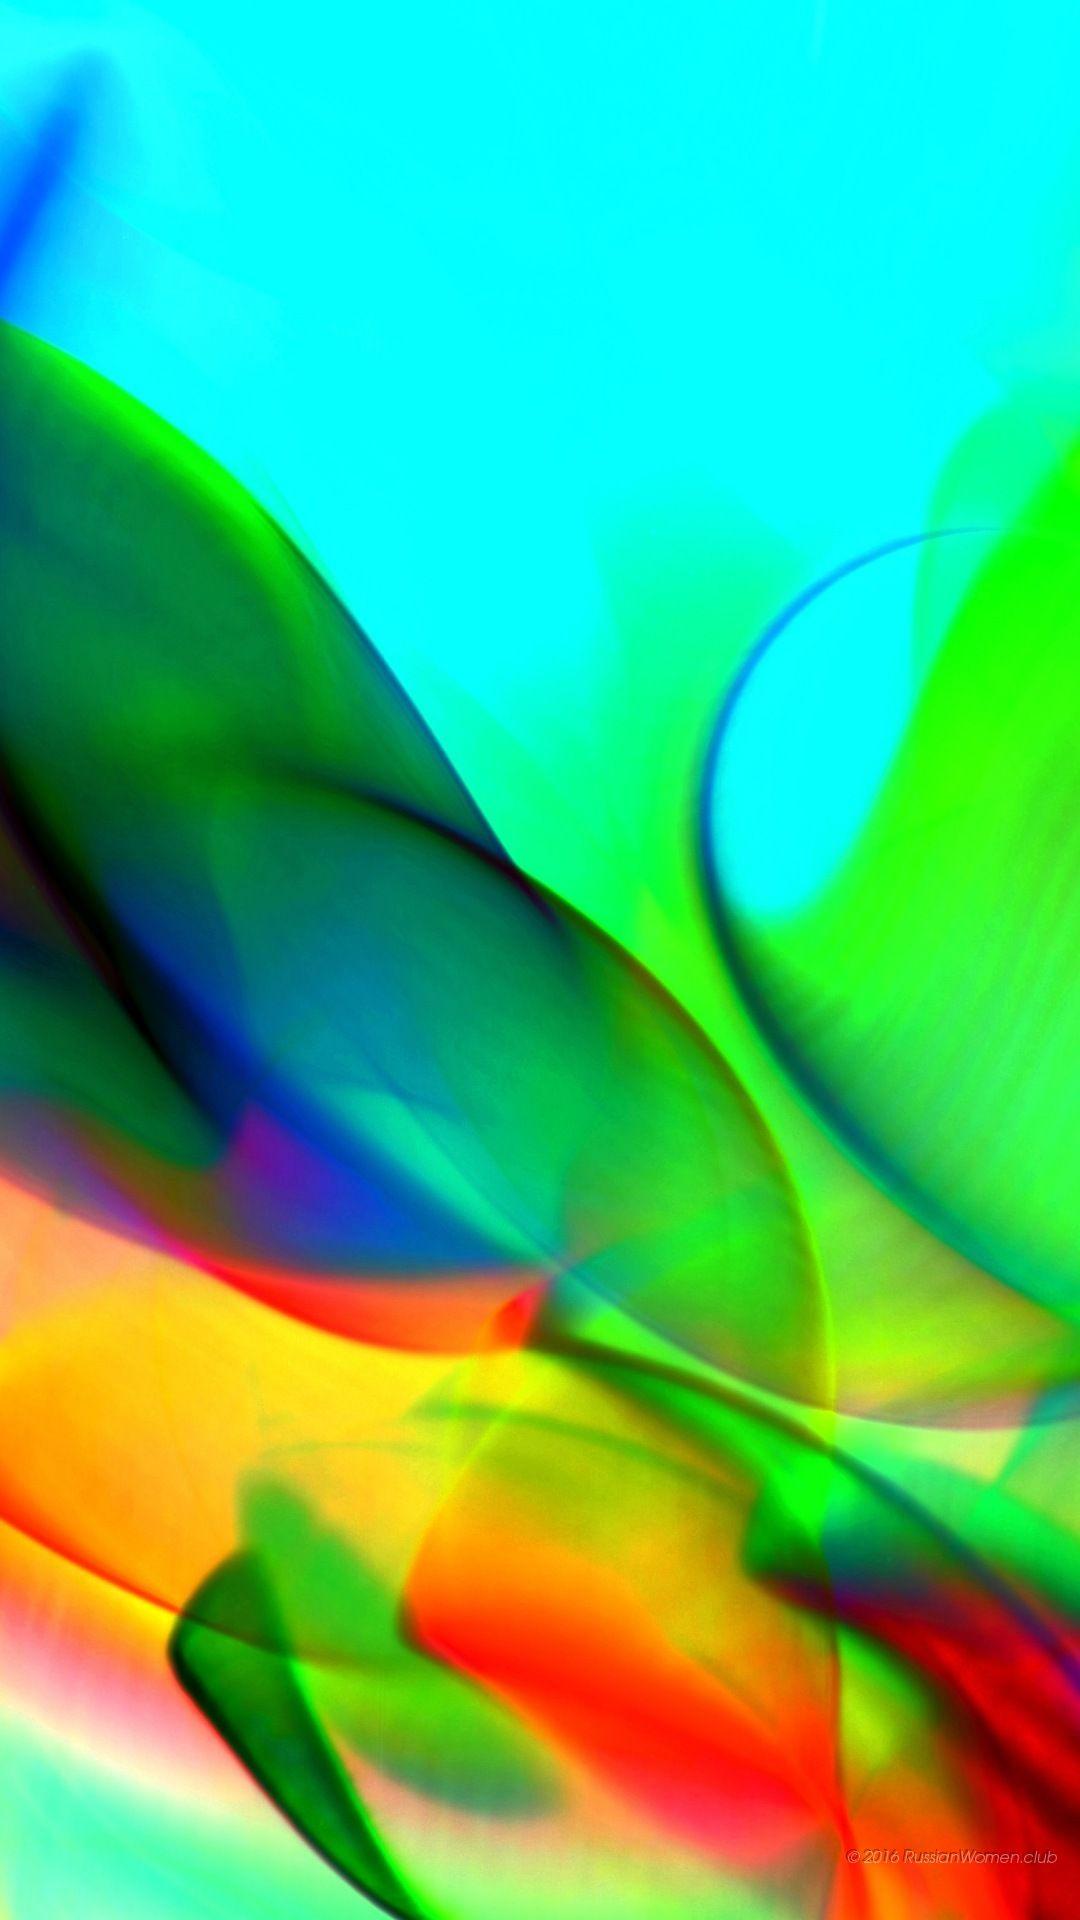 Abstract. Full HD 1080x1920 image download